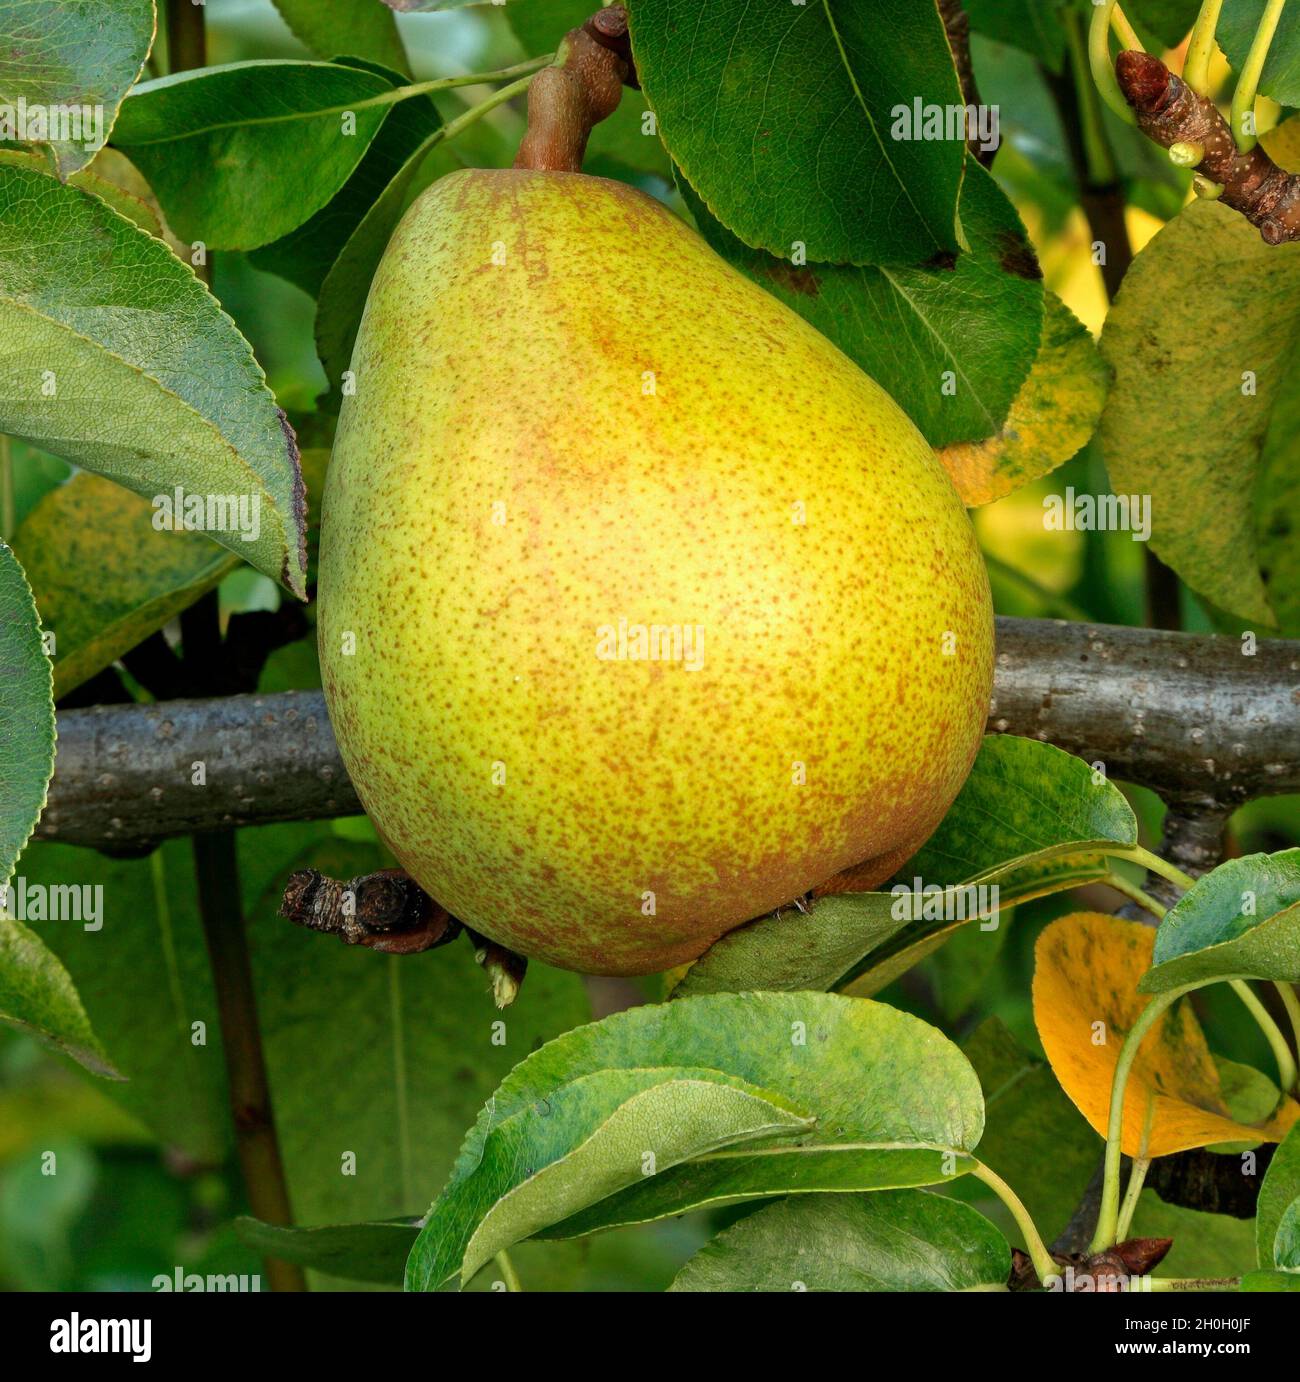 Pear 'Doyenne du Comice', Pyrus communis, pears, fruit, healthy eating, Stock Photo